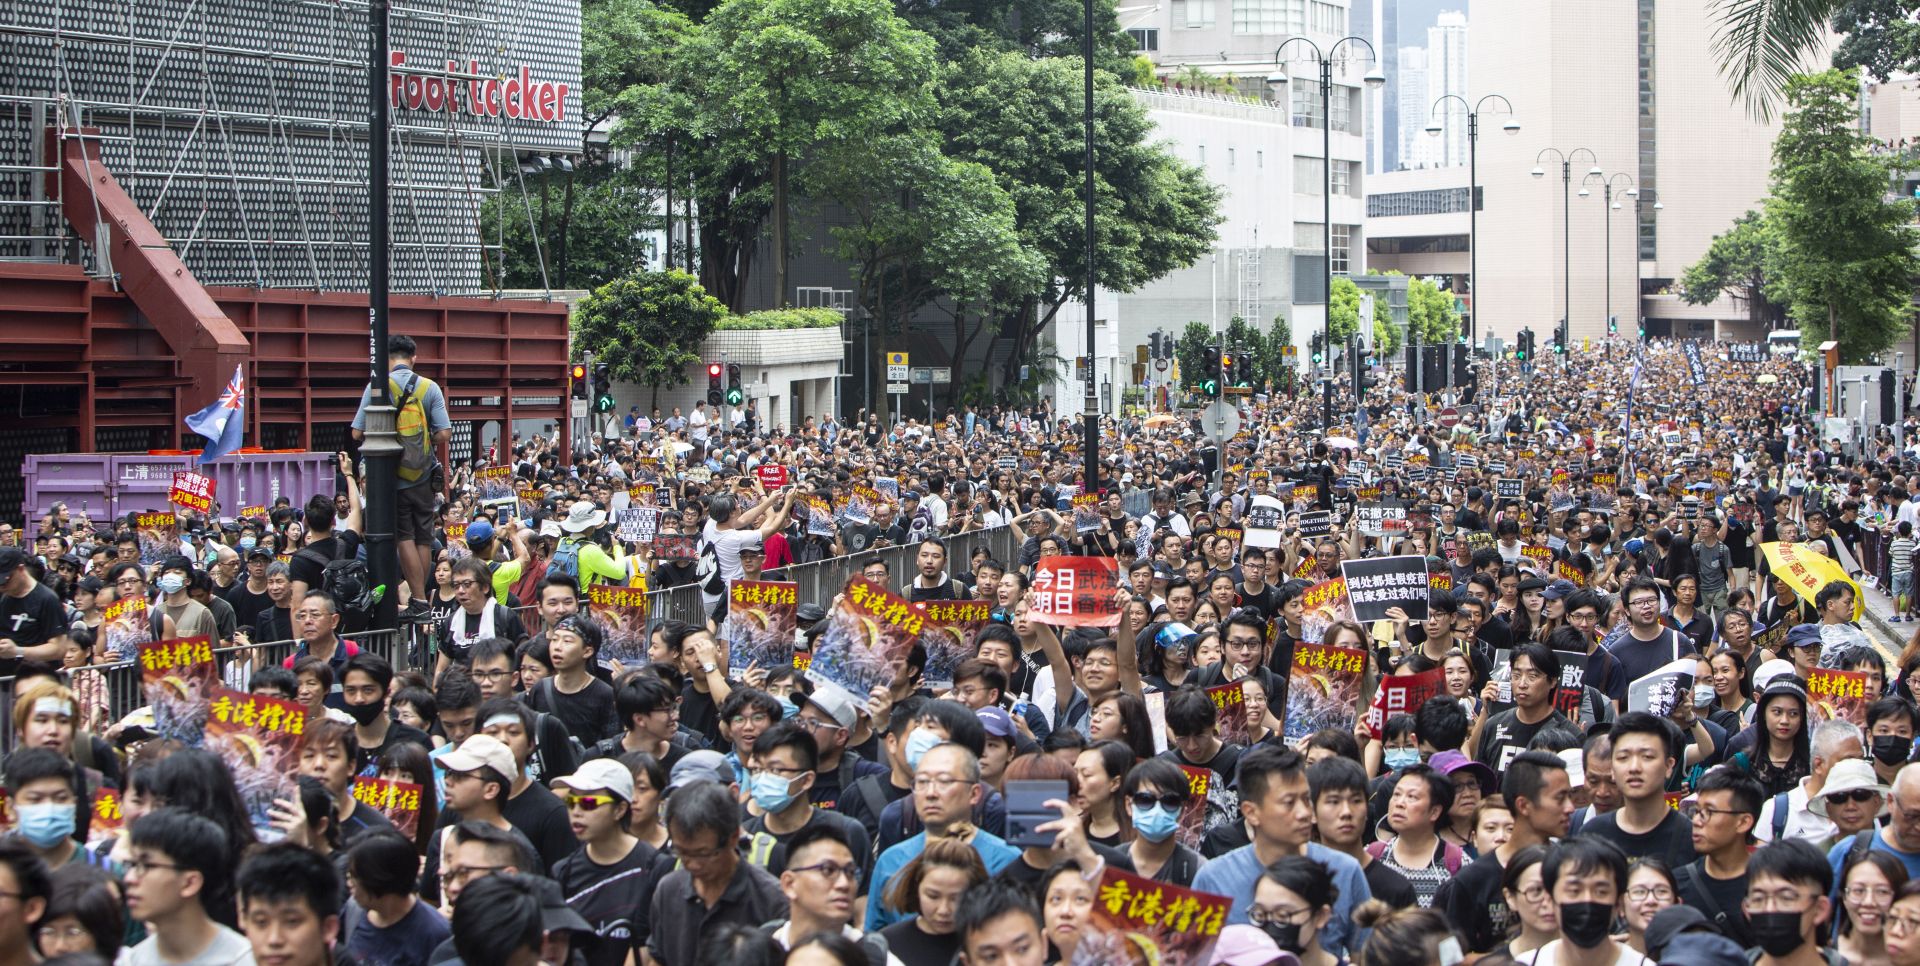 epa07700907 Anti-extradition bill protesters take part in a march to West Kowloon railway station in Hong Kong, China, 07 July 2019. The march aims to spread the spirit of resistance all over the land from Hong Kong Island to Kowloon, and even to Mainland China, according to the organizers.  EPA/CHAN LONG HEI